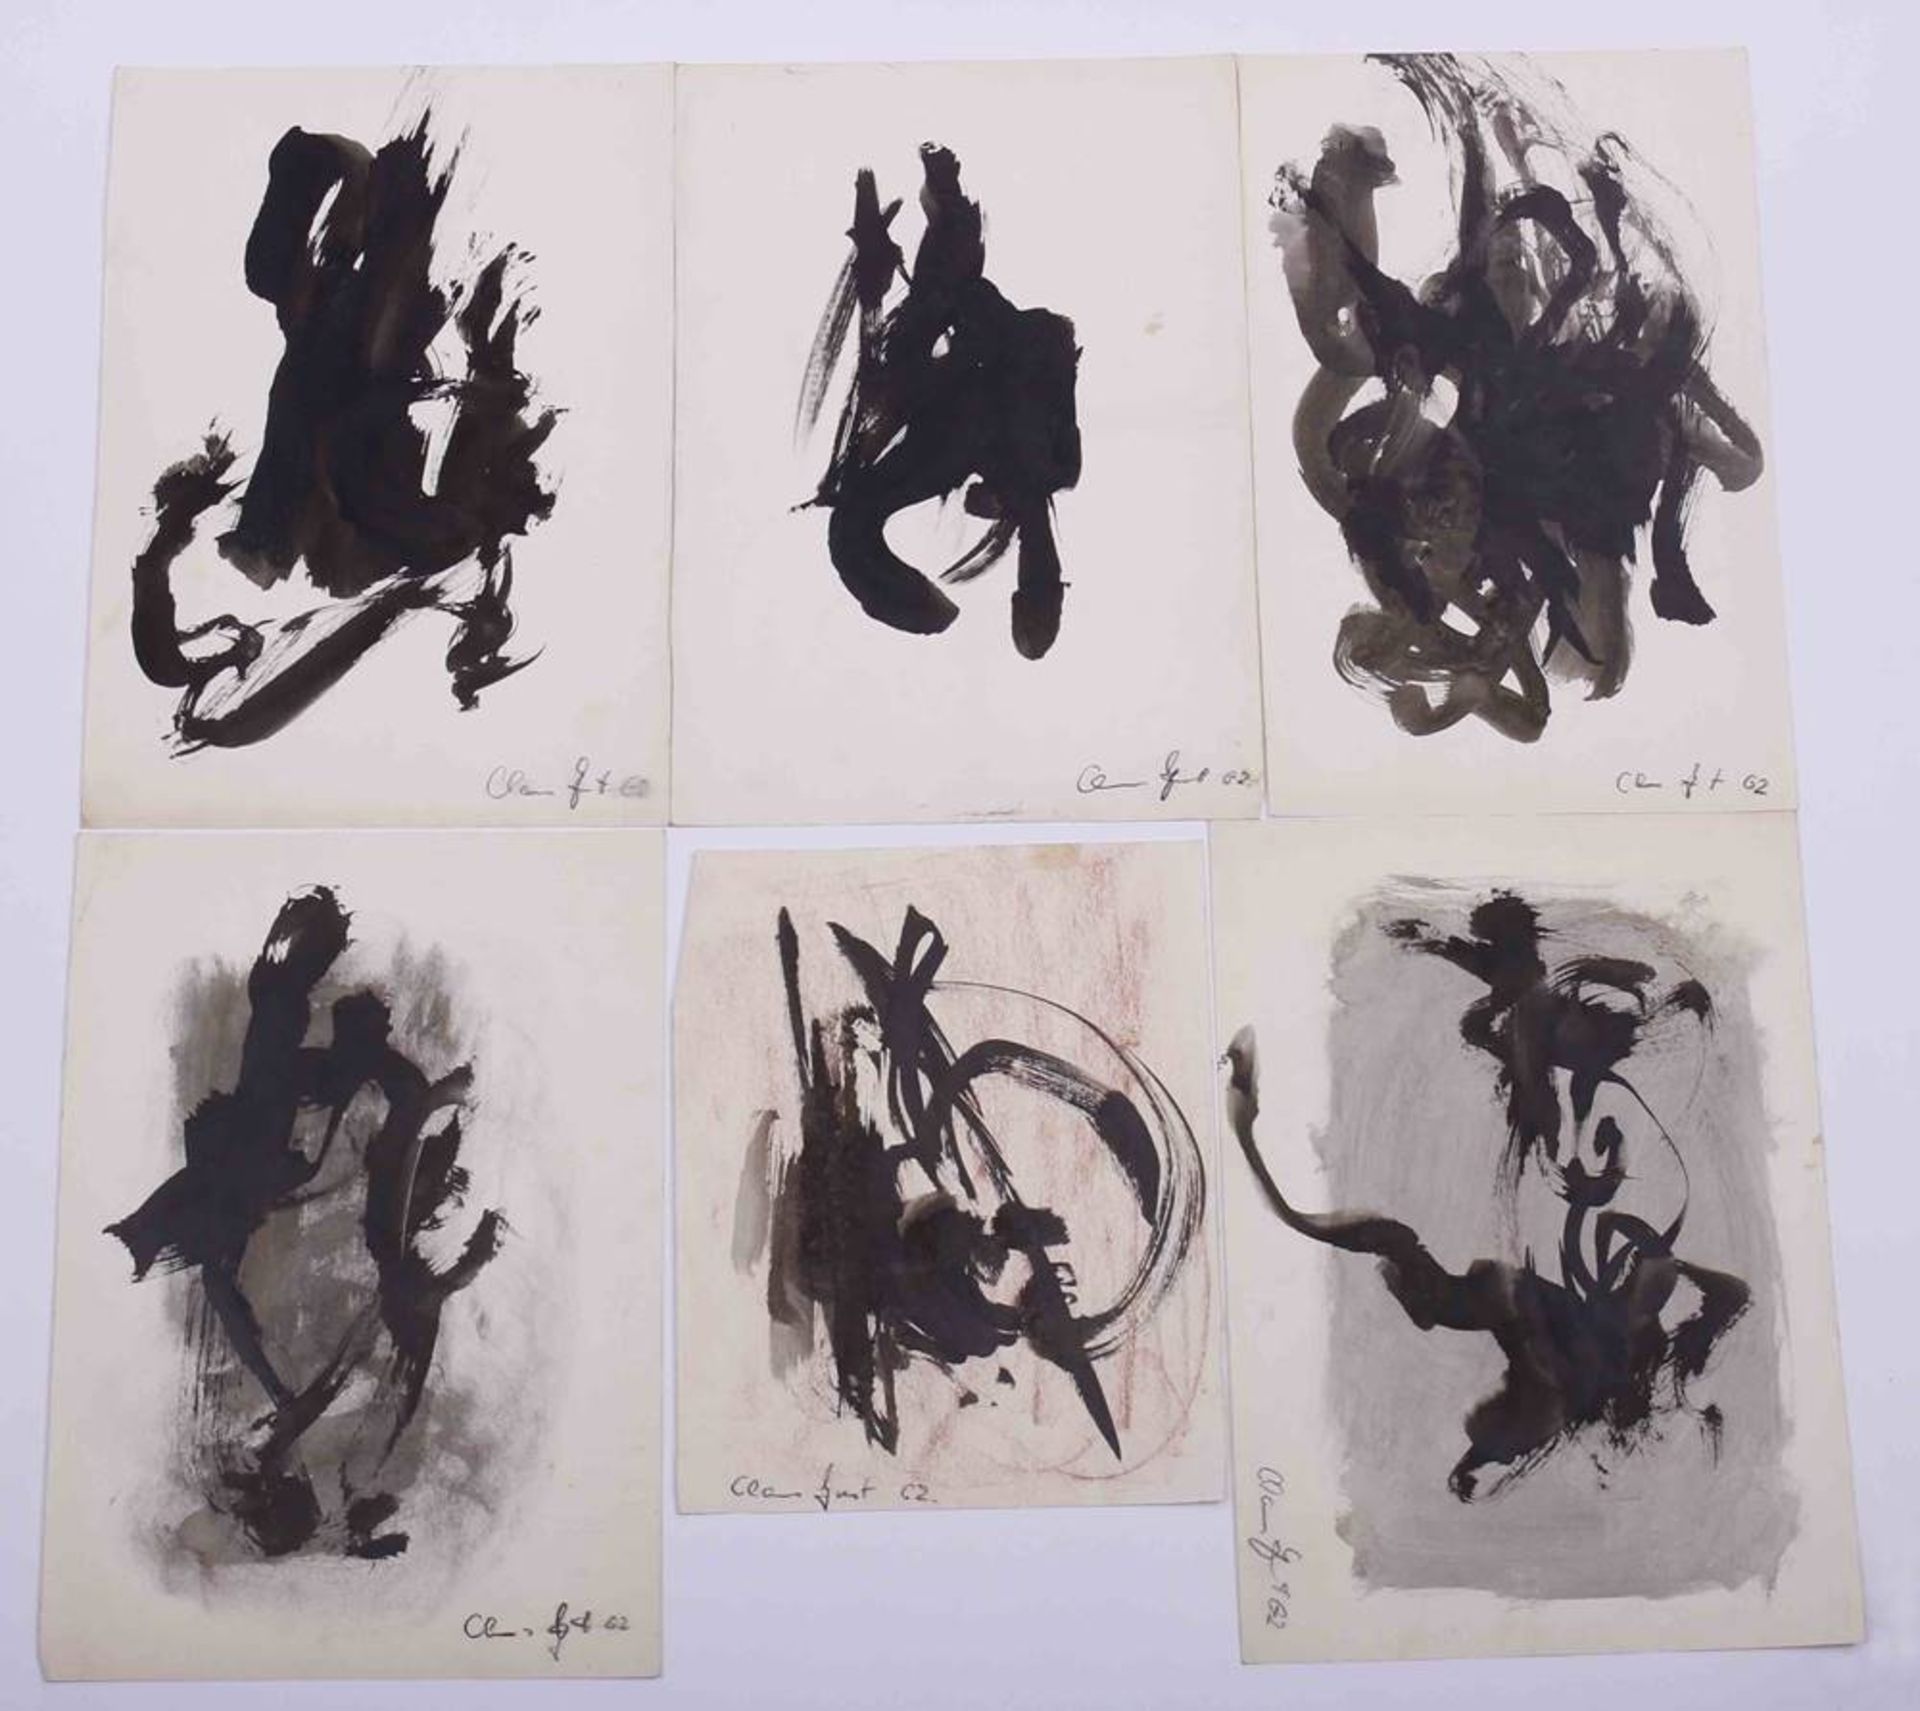 Claus Just6 ink drawings in the manner of Tachisme, ca. 1962, signed, HxW: ca. 37x26cmClaus Just6